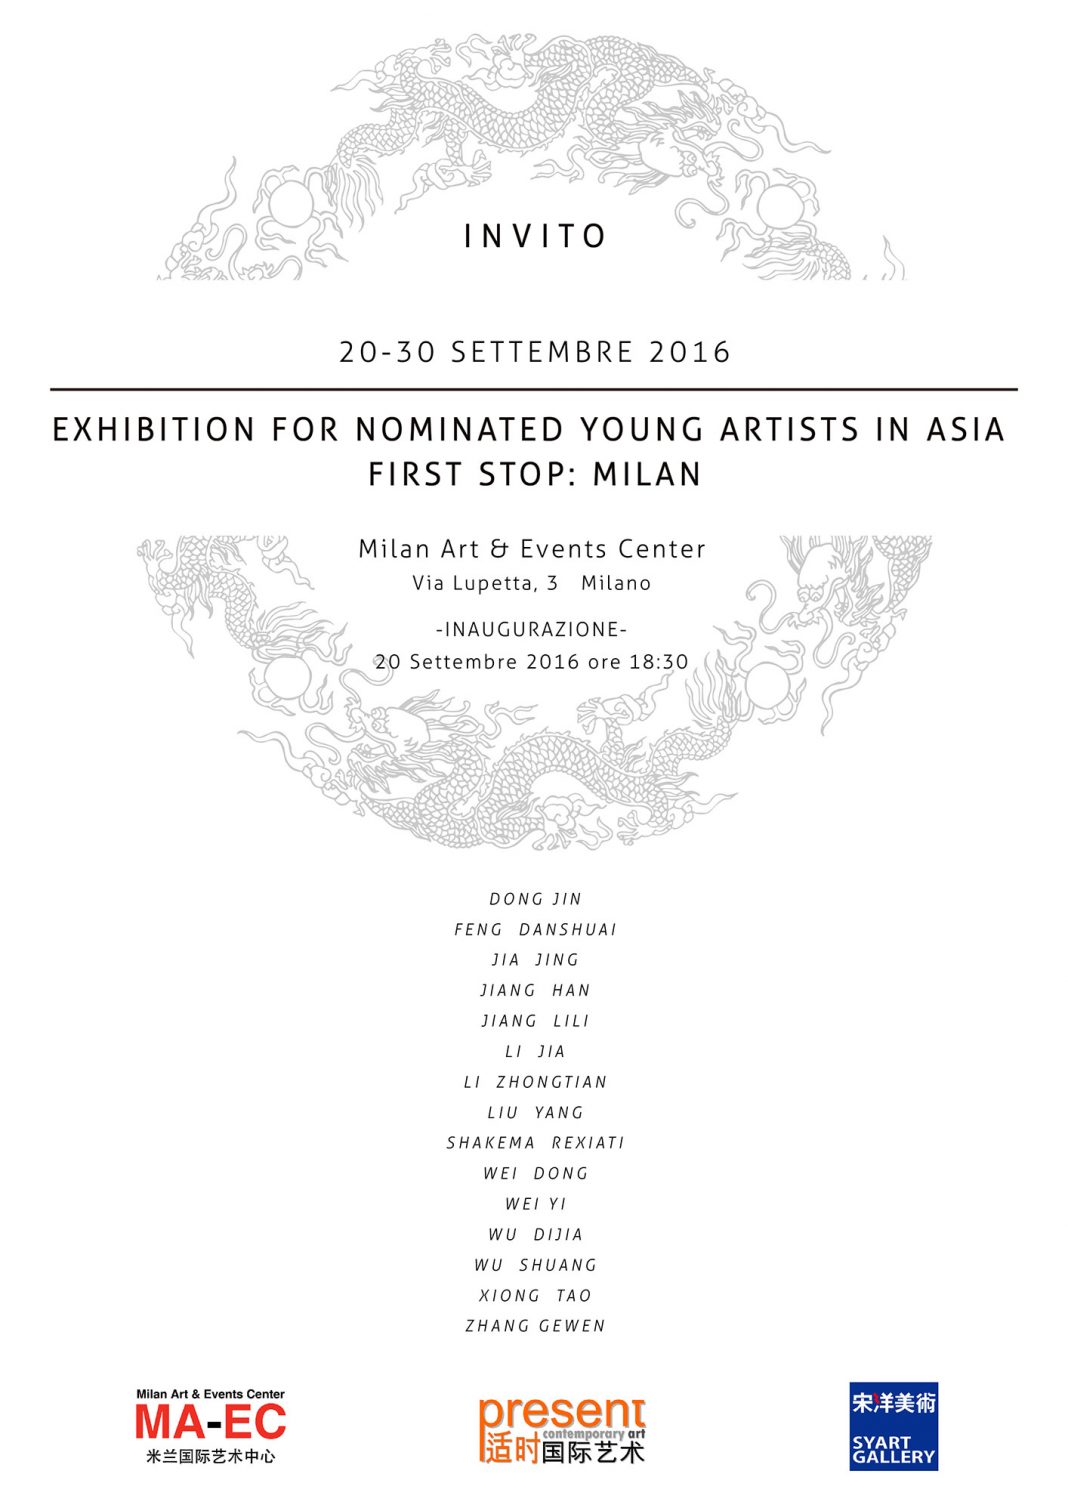 Exhibition for nominated young artists in Asia. First step: Milanhttps://www.exibart.com/repository/media/eventi/2016/09/exhibition-for-nominated-young-artists-in-asia.-first-step-milan-1068x1511.jpg